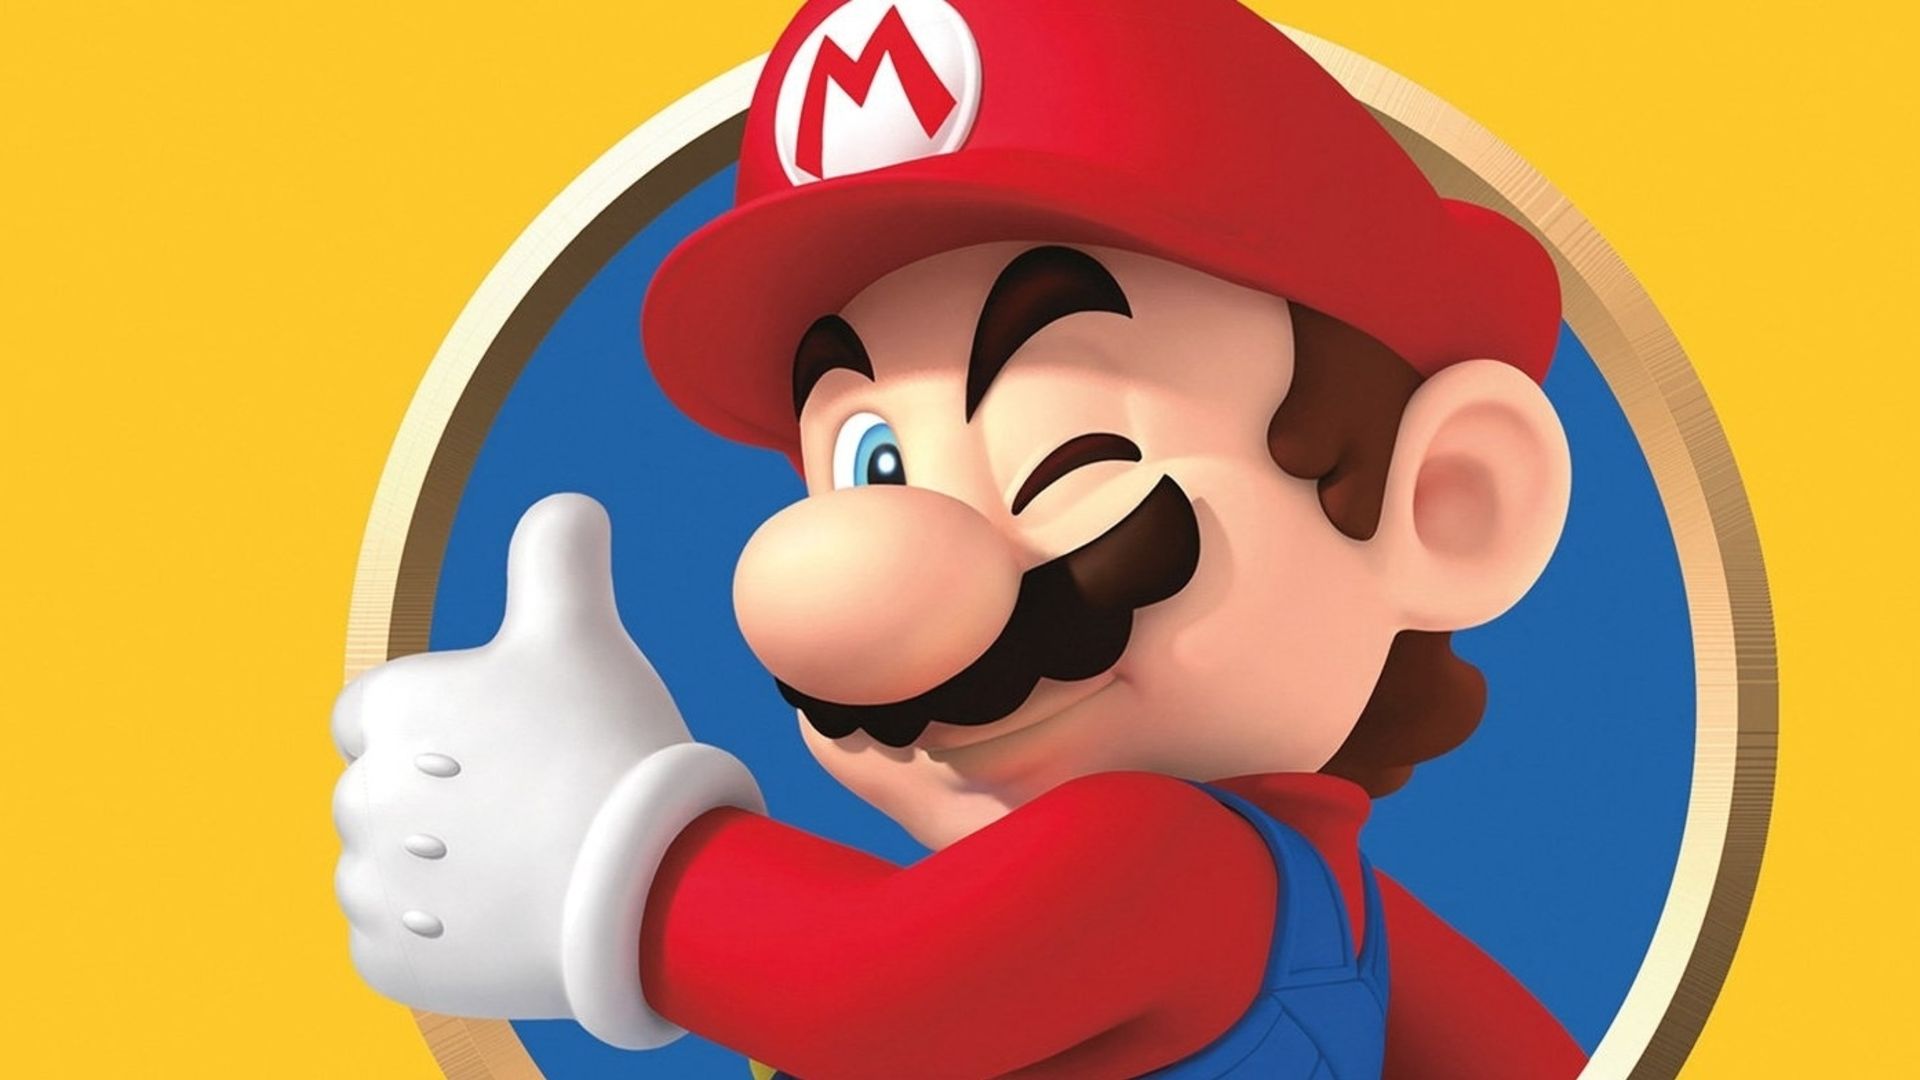 Nintendo games have become too easy: We need more difficulty options